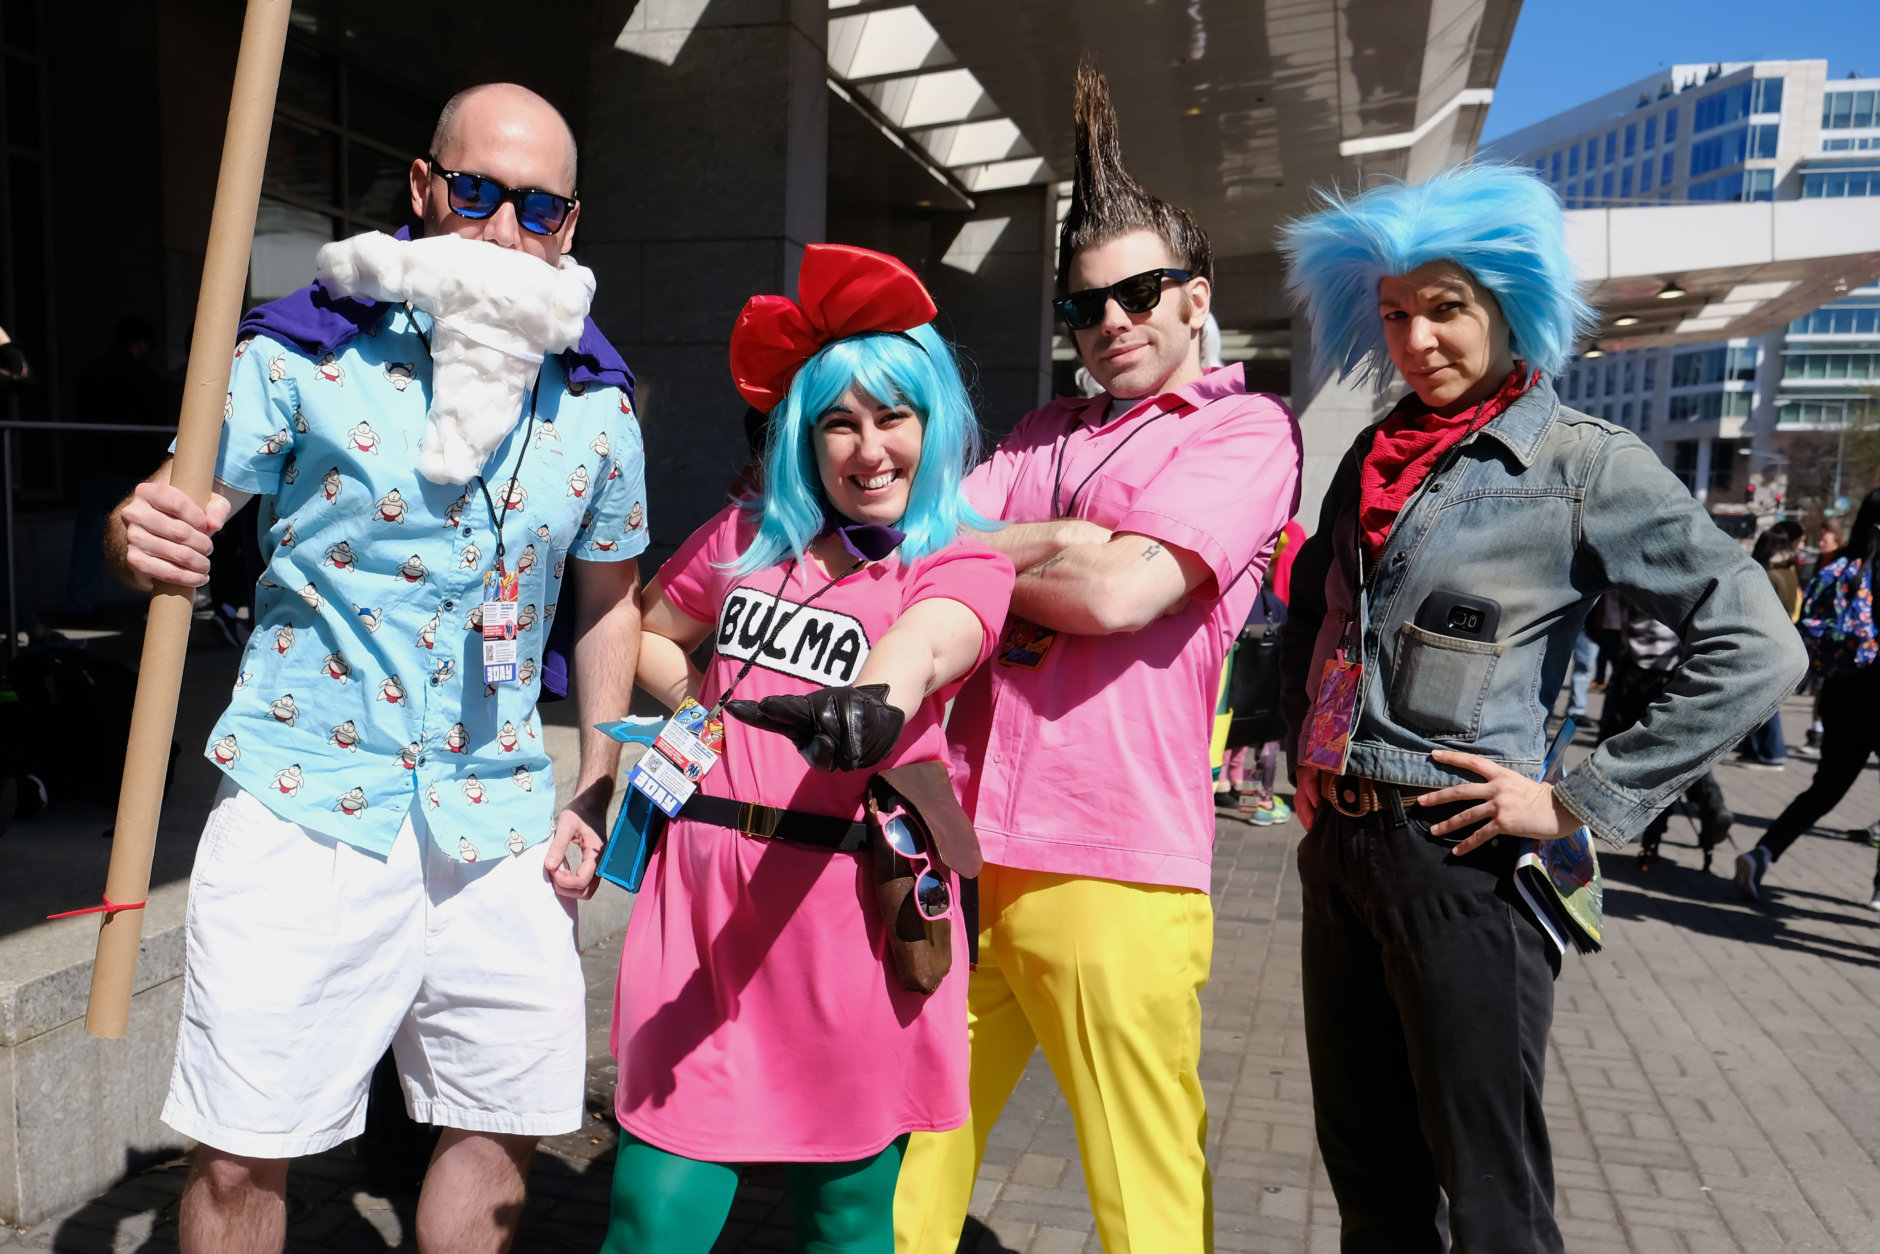 Attendees dressed as Master Roshi, Bulma, Vegeta and Trunks from "Dragon Ball Z" arrive at Awesome Con 2018 at the Walter E. Washington Convention Center, Washington, D.C. (Shannon Finney)